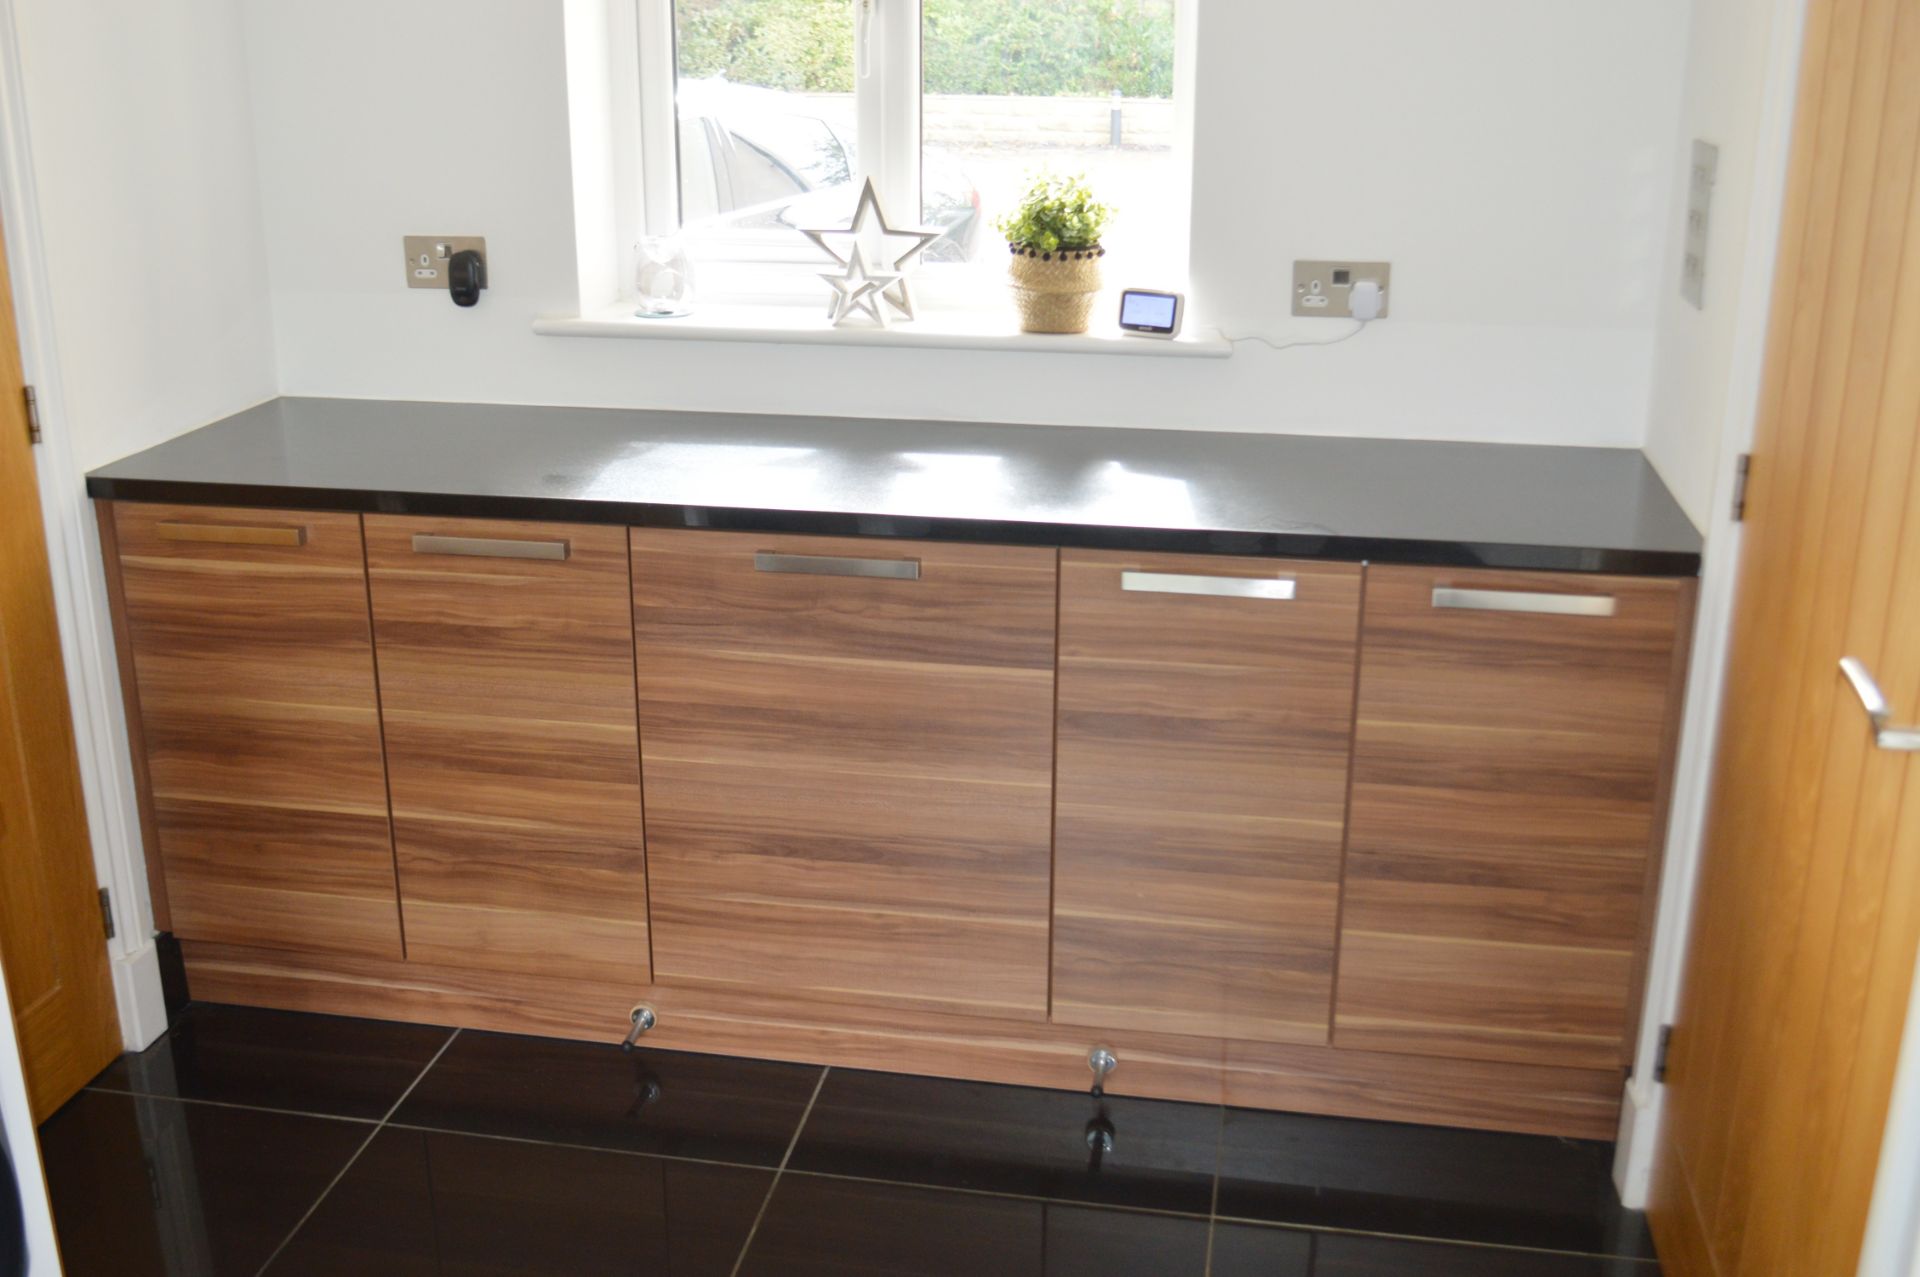 1 x Contemporary Bespoke Fitted Kitchen With Neff Branded Appliances - Collection Date: 1st November - Image 16 of 52